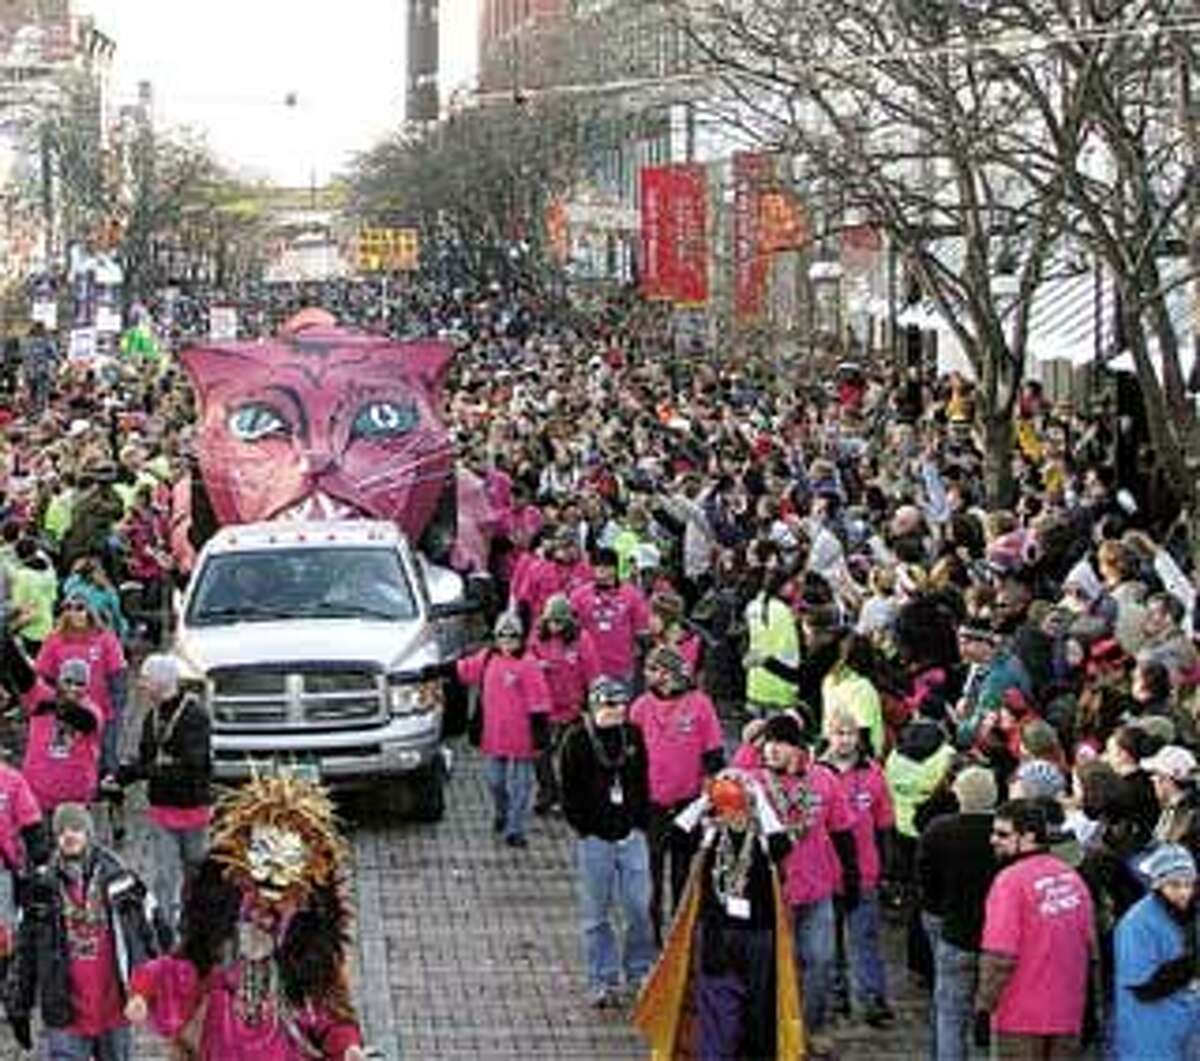 The parade that runs down Church Street in Burlington, Vt., Saturday will include about 30 floats. (Magic Hat Brewing Co. photos)